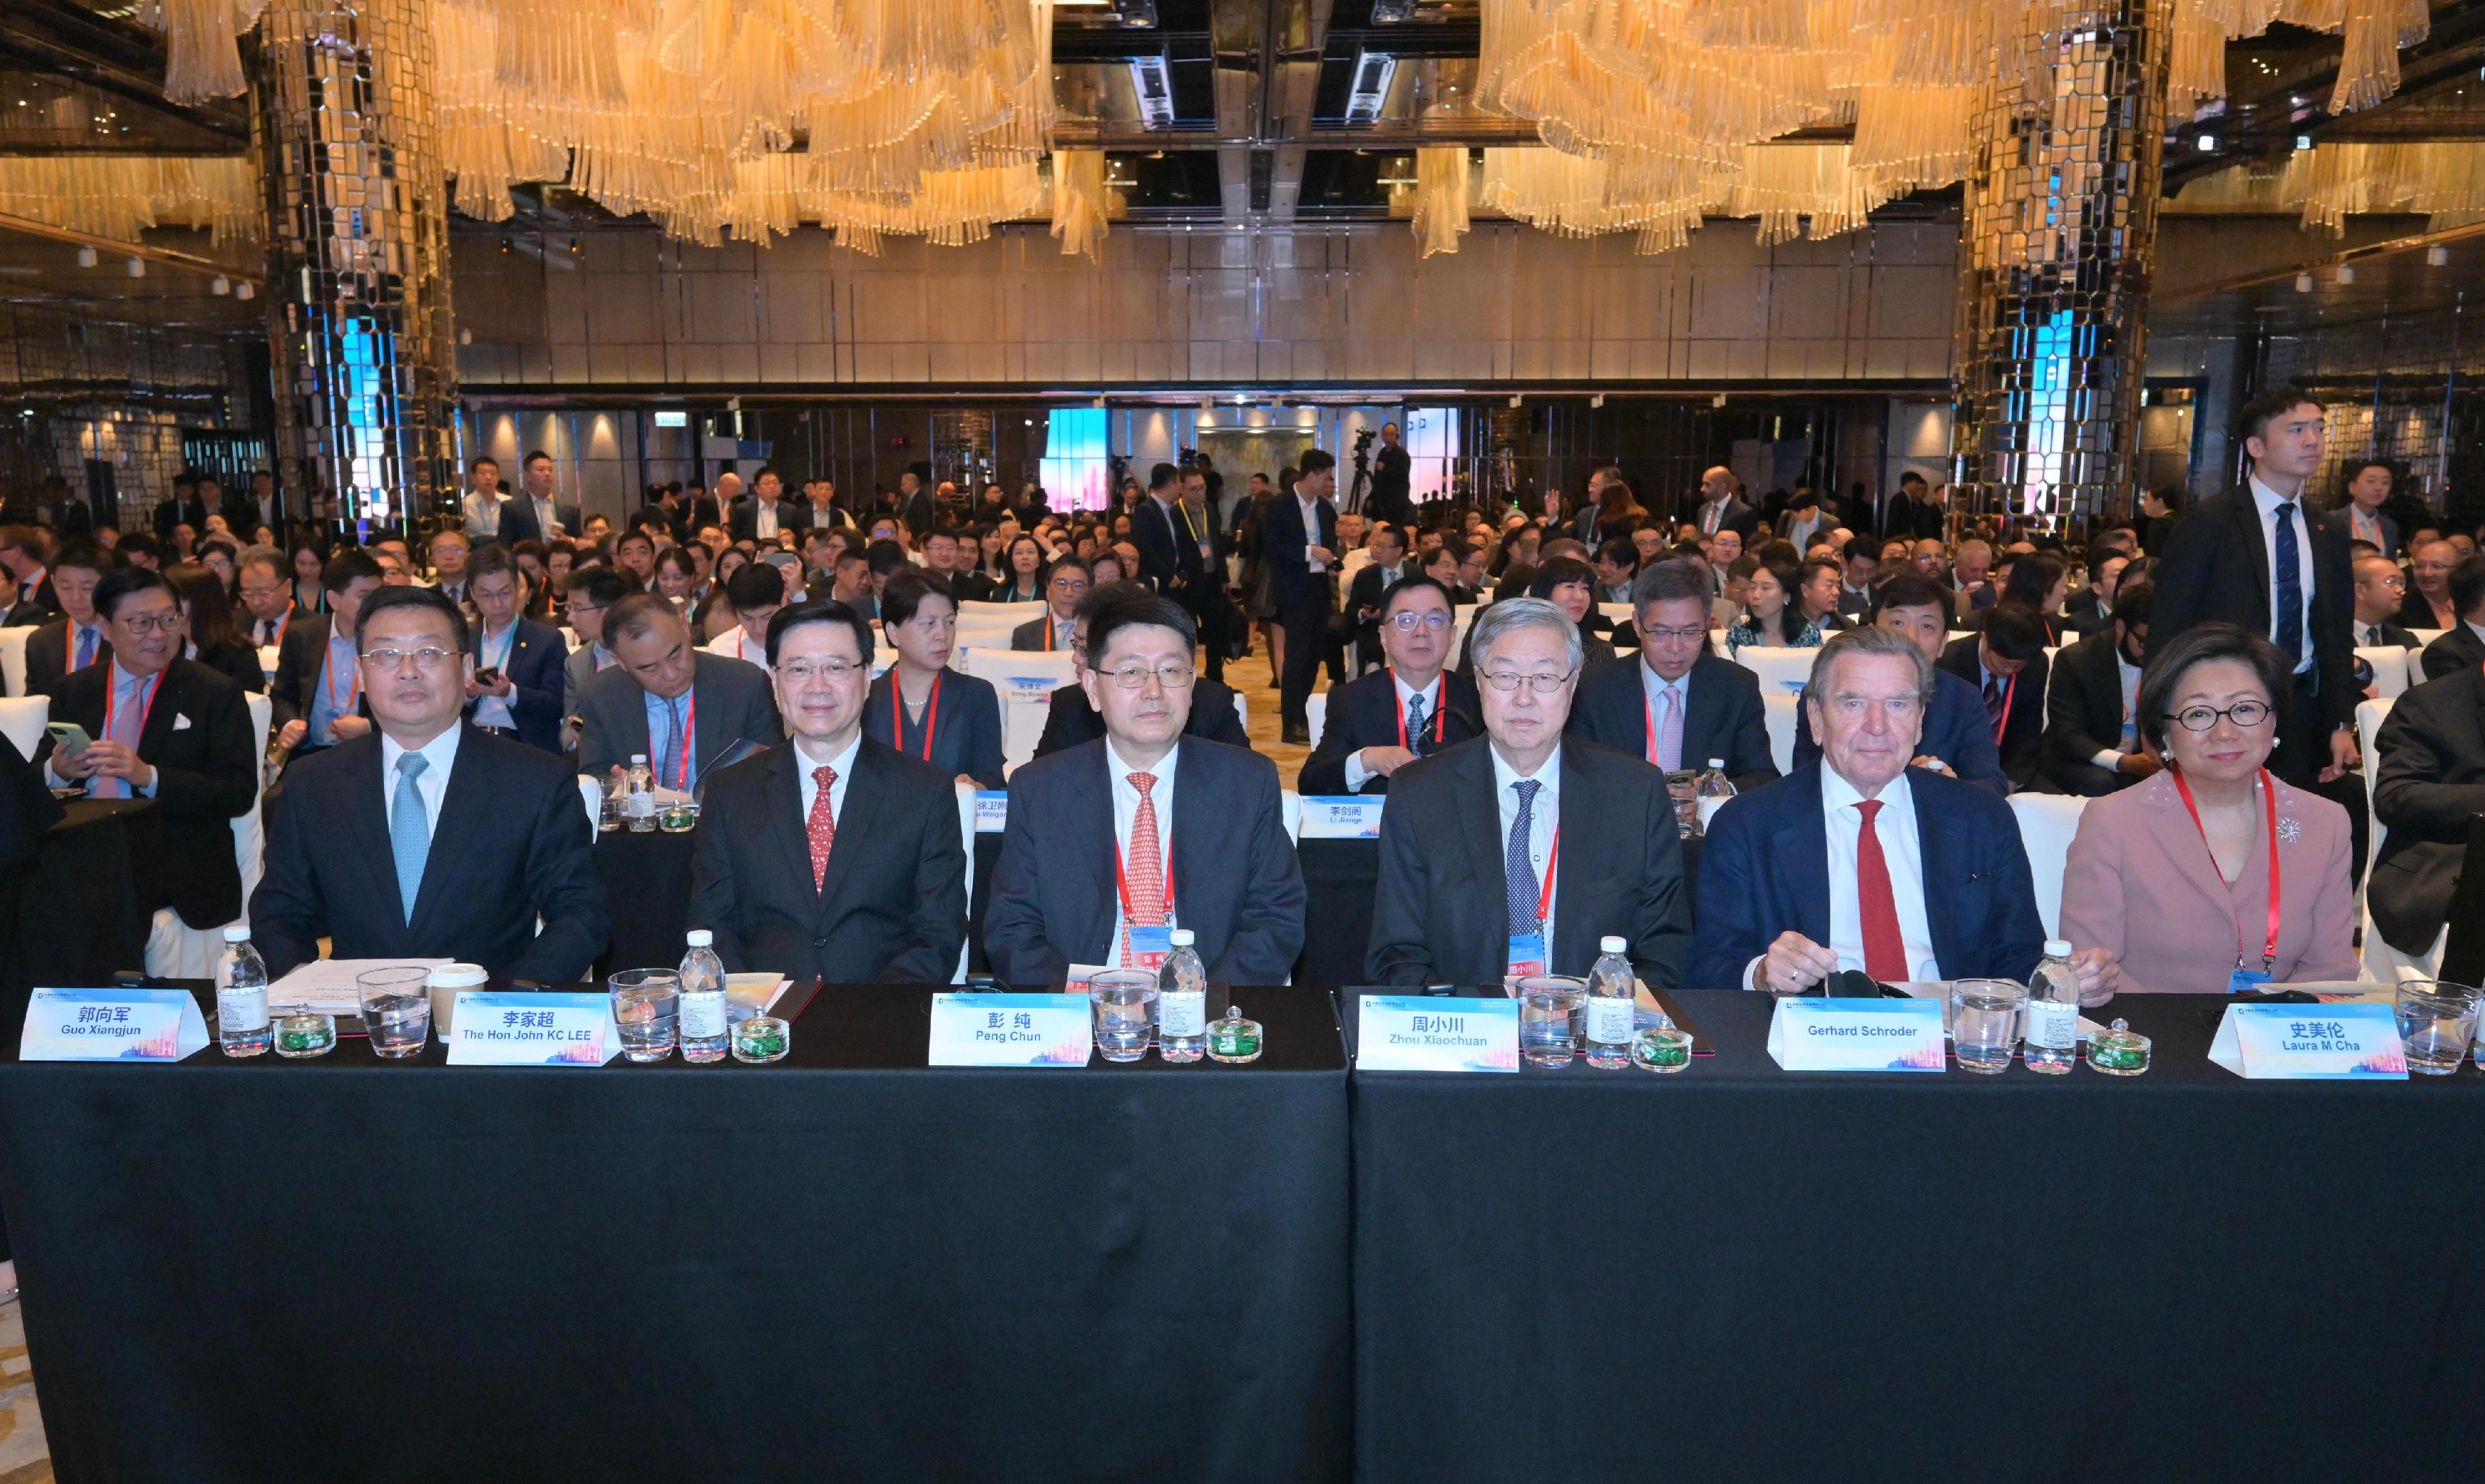 The Chief Executive, Mr John Lee, attended the China Investment Corporation Forum 2023 & Cross-Border Investment and International Industrial Cooperation Conference today (September 20). Photo shows (front row, from left) Executive Vice President and Deputy Chief Investment Officer of China Investment Corporation (CIC) Mr Guo Xiangjun; Mr Lee; the Chairman and Chief Executive Officer of CIC, Mr Peng Chun; and member of the International Advisory Council of CIC and the Vice Chairman of the Board of Boao Forum for Asia, Mr Zhou Xiaochuan.